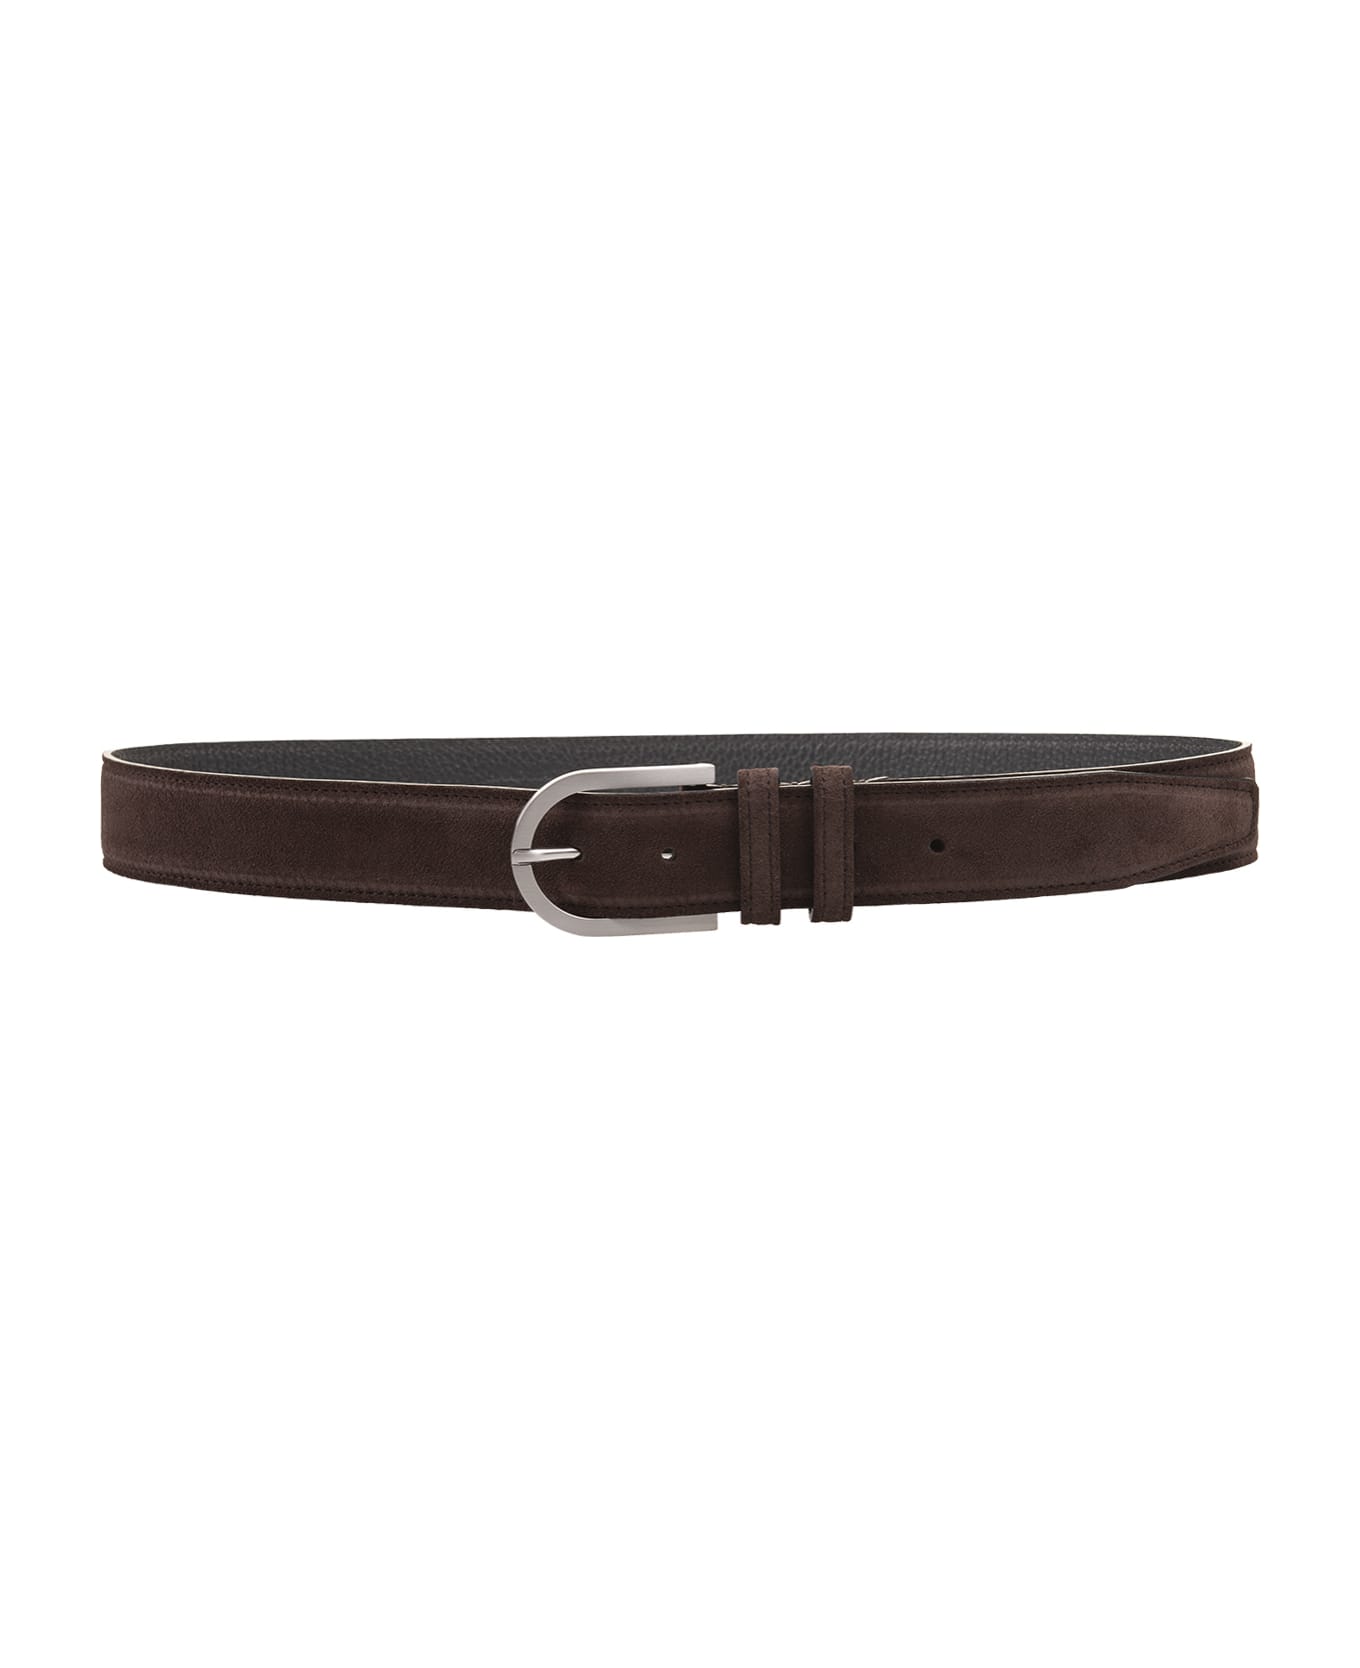 Kiton Brown Suede Belt With Silver Buckle - Brown ベルト